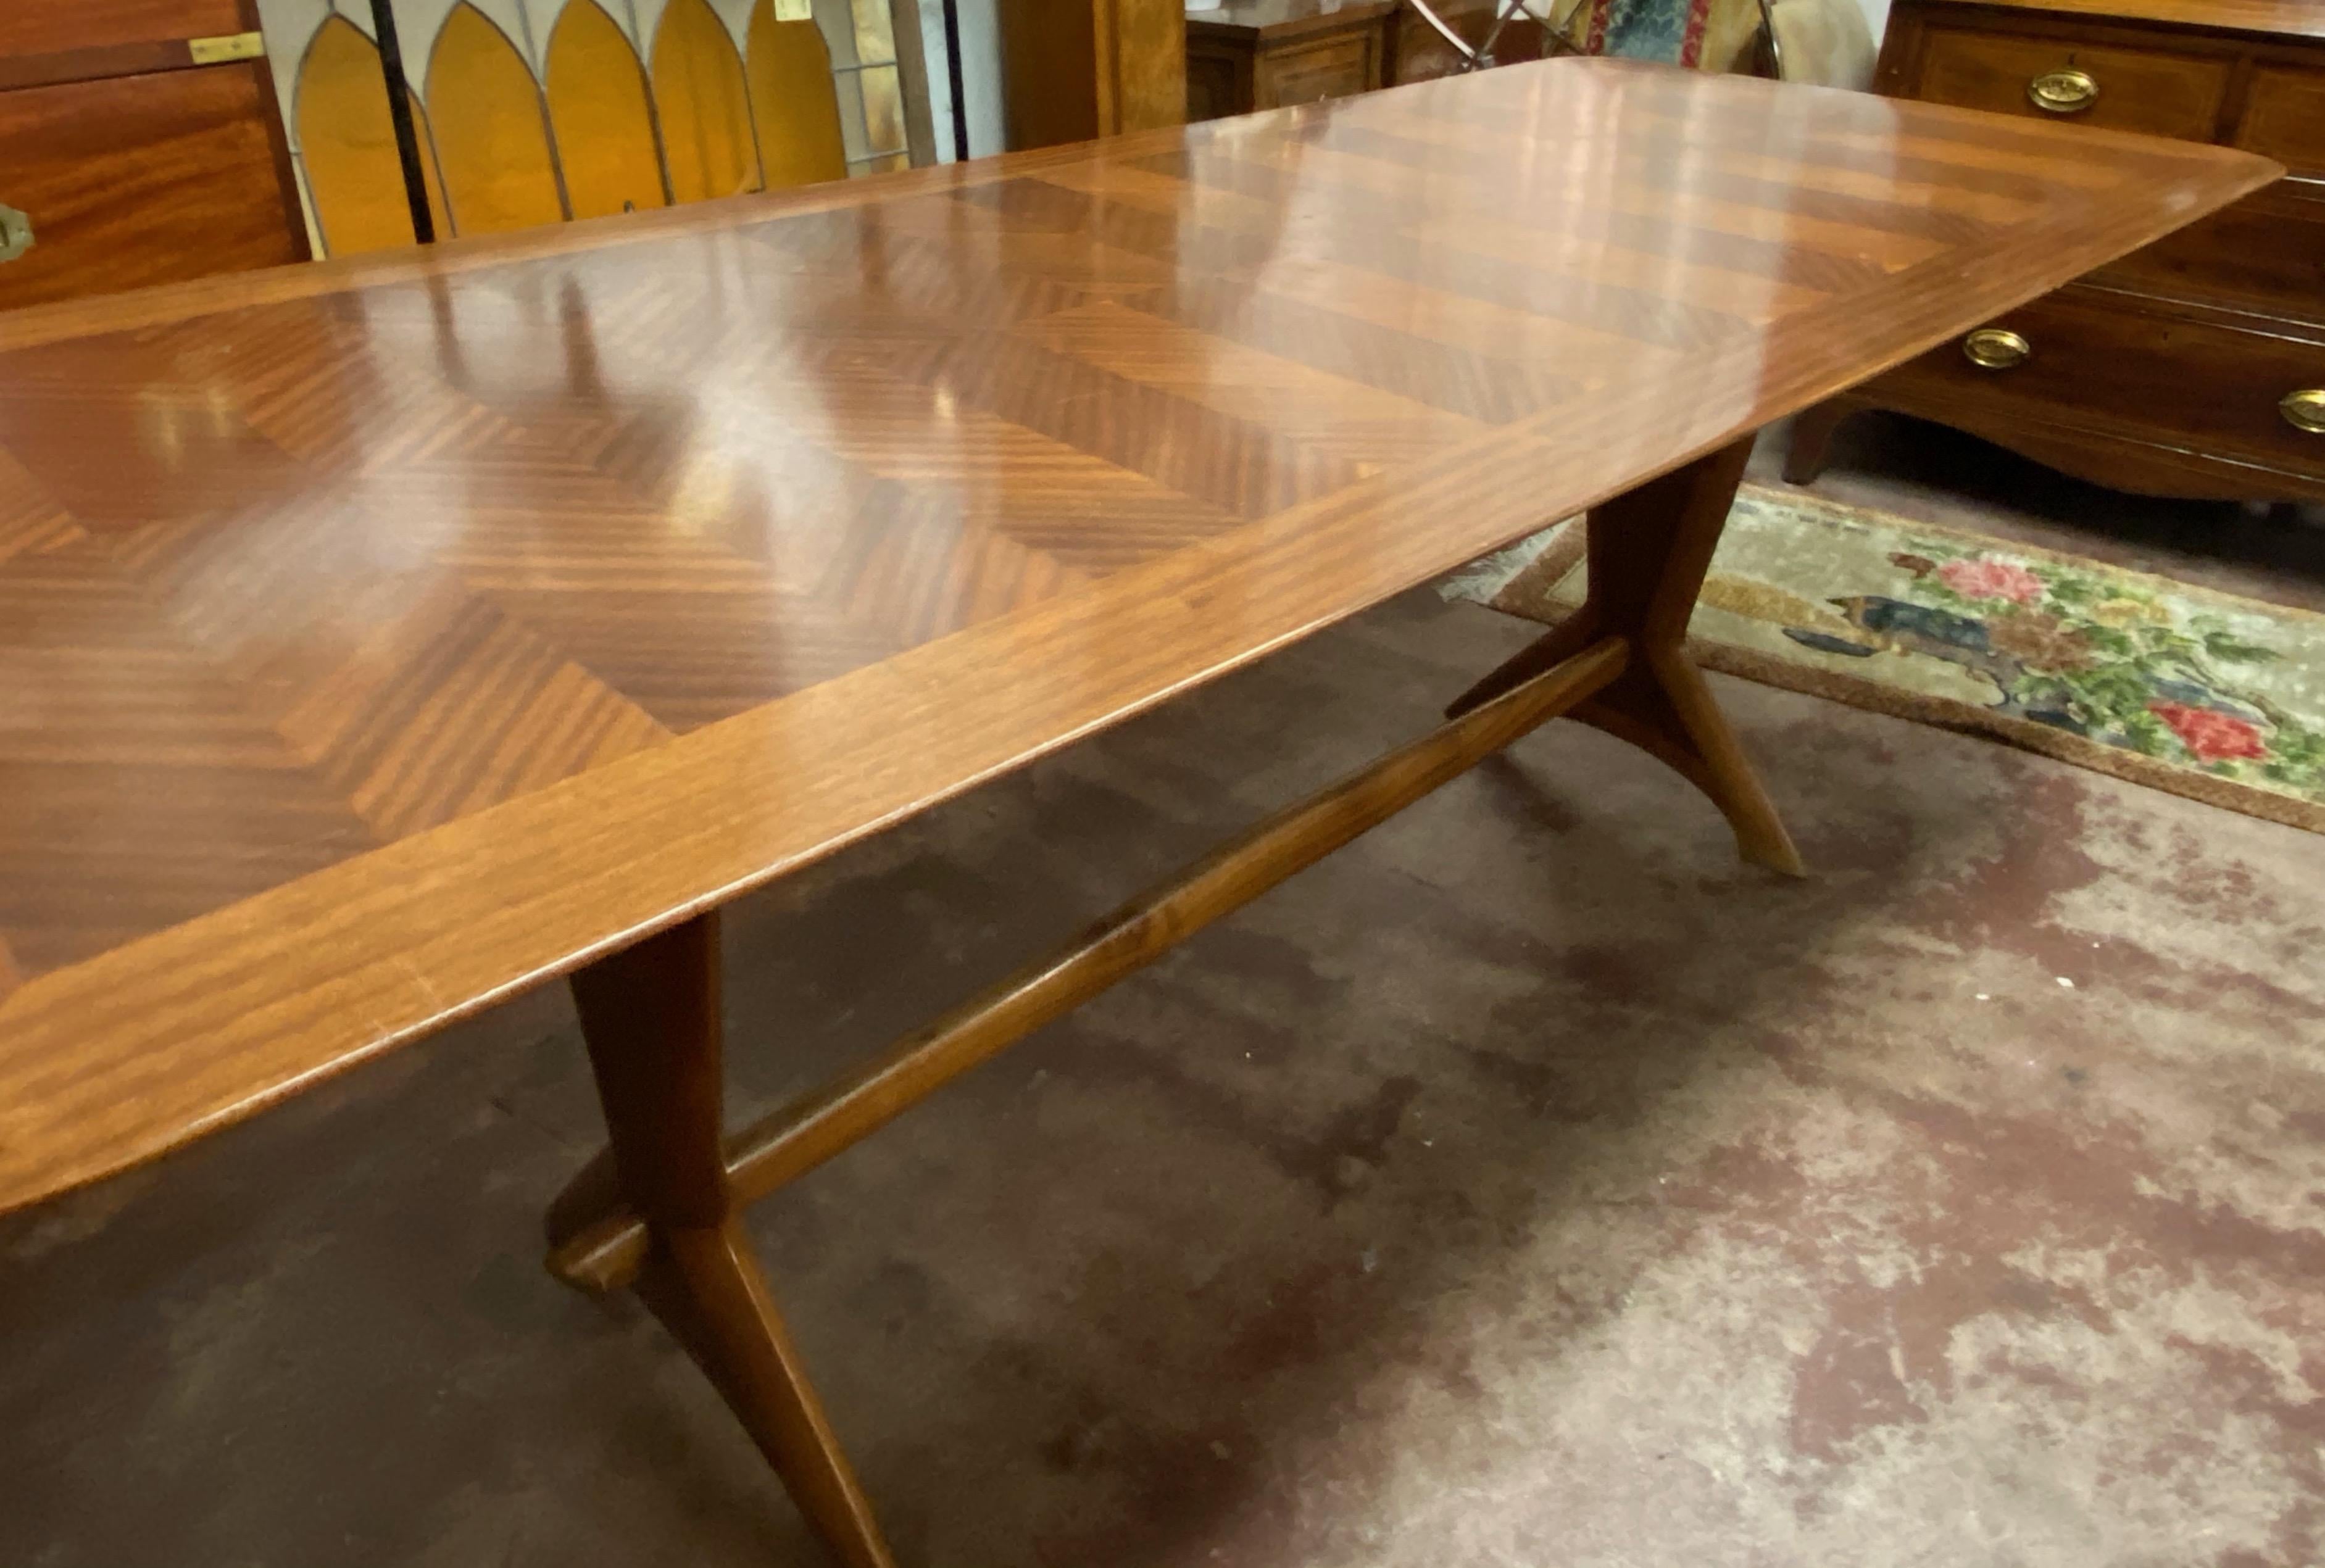 Mid-20th century cross banded mahogany trestle base dining table, circa 1950s.

Classic Danish modern styling with a cross banded mahogany top. The table is quality built by talented cabinetmakers.

The top of the table shows various scuff marks